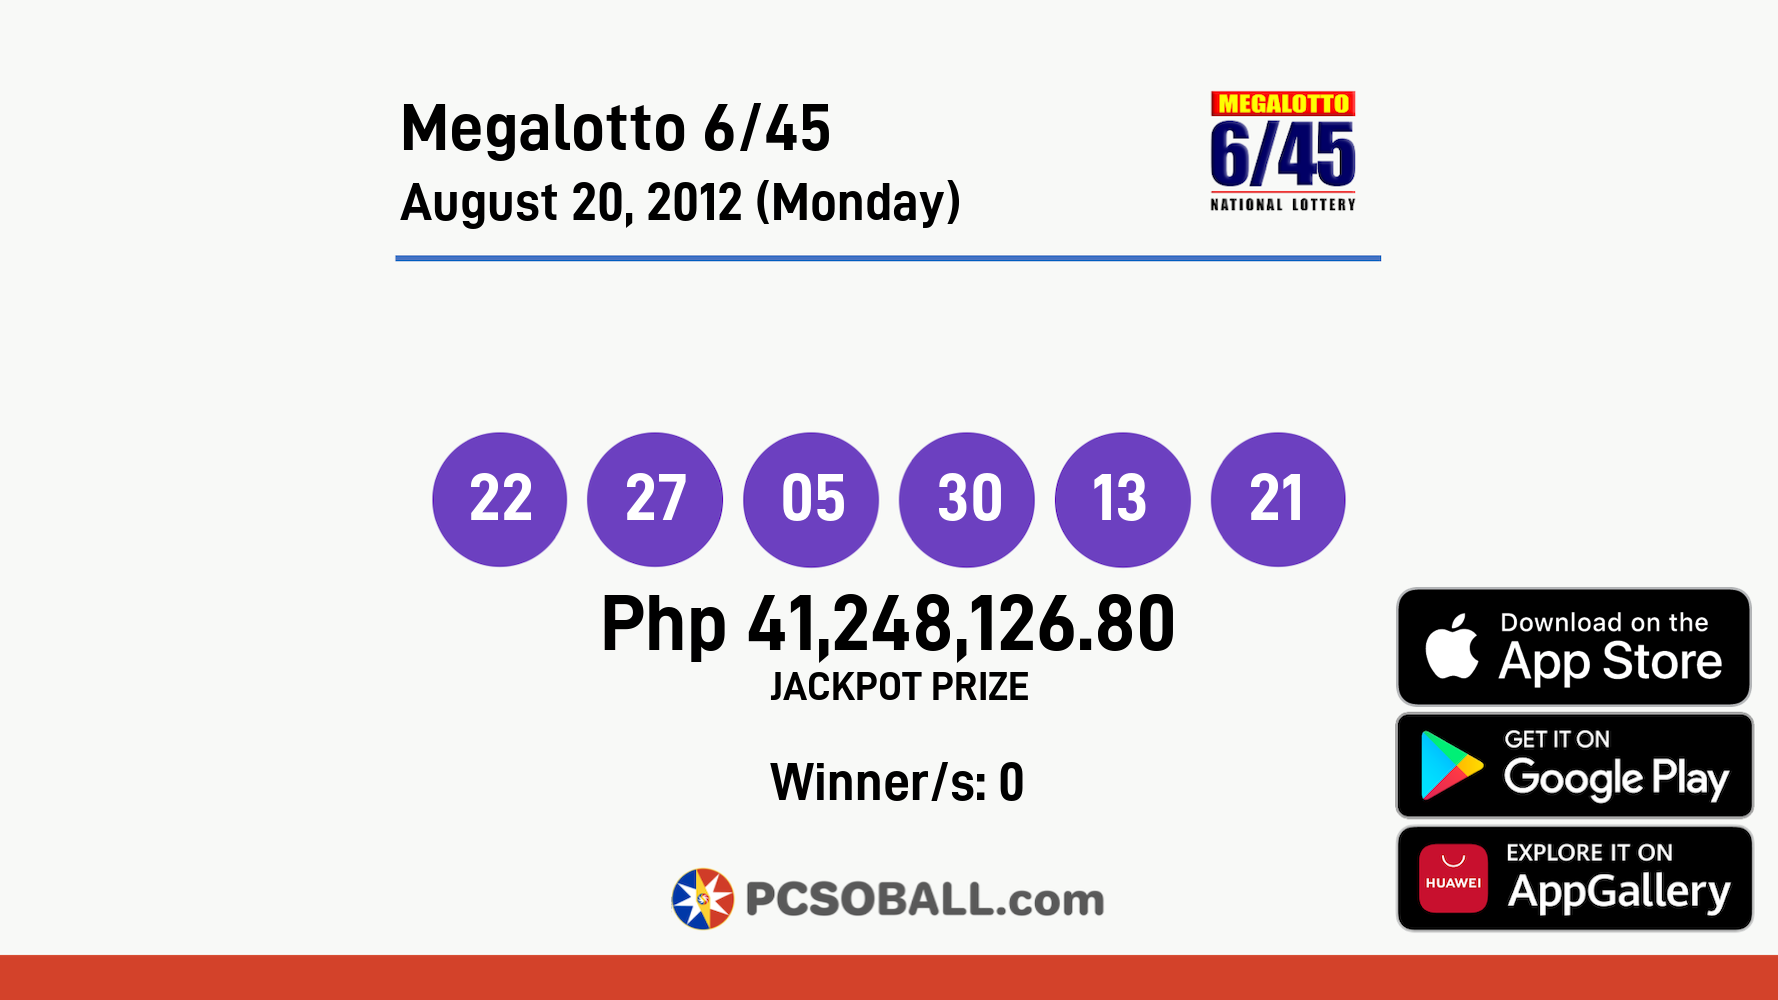 Megalotto 6/45 August 20, 2012 (Monday) Result